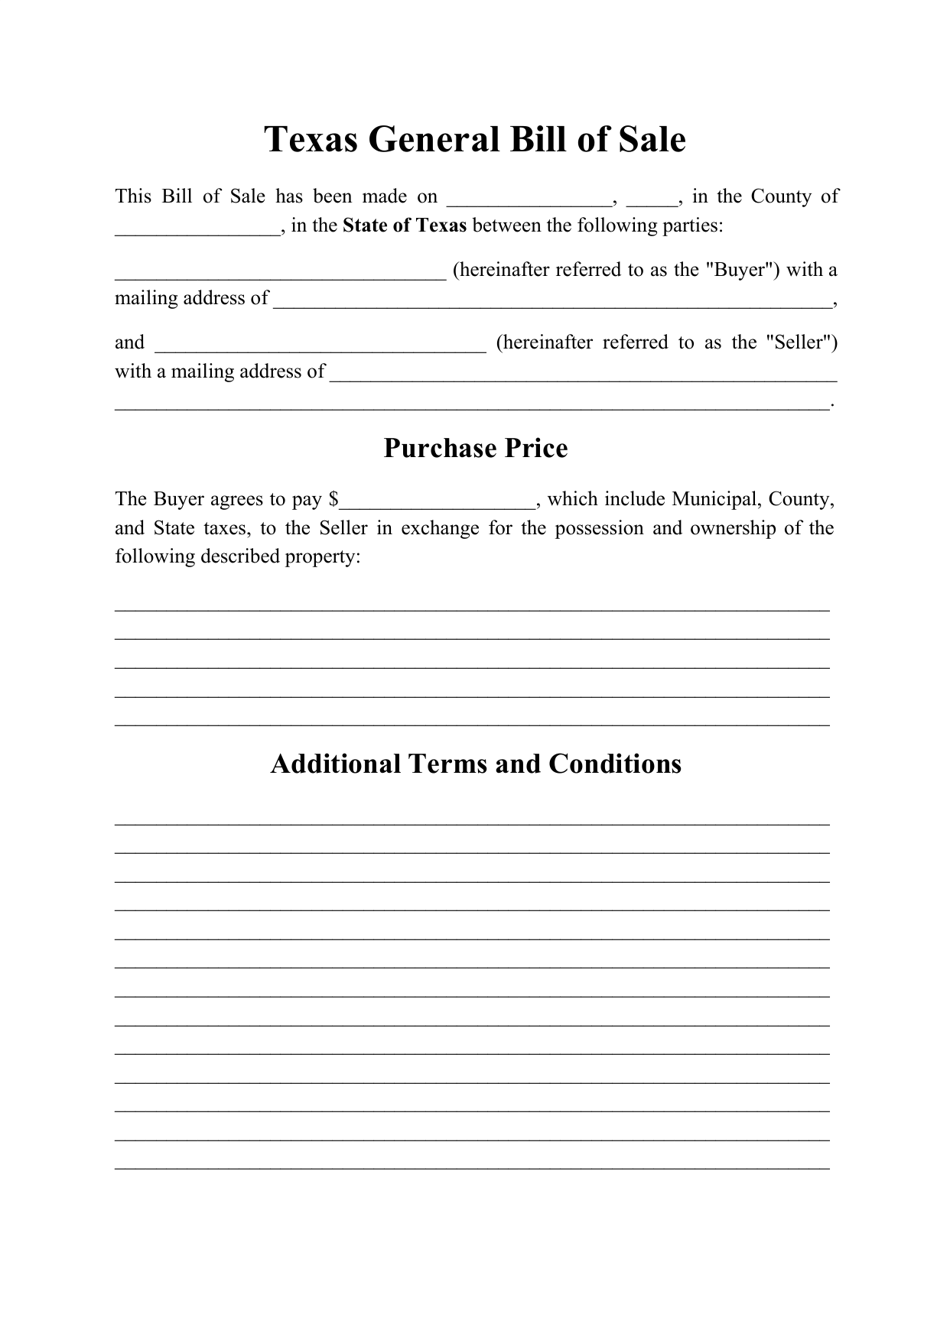 Generic Bill of Sale Form - Texas, Page 1